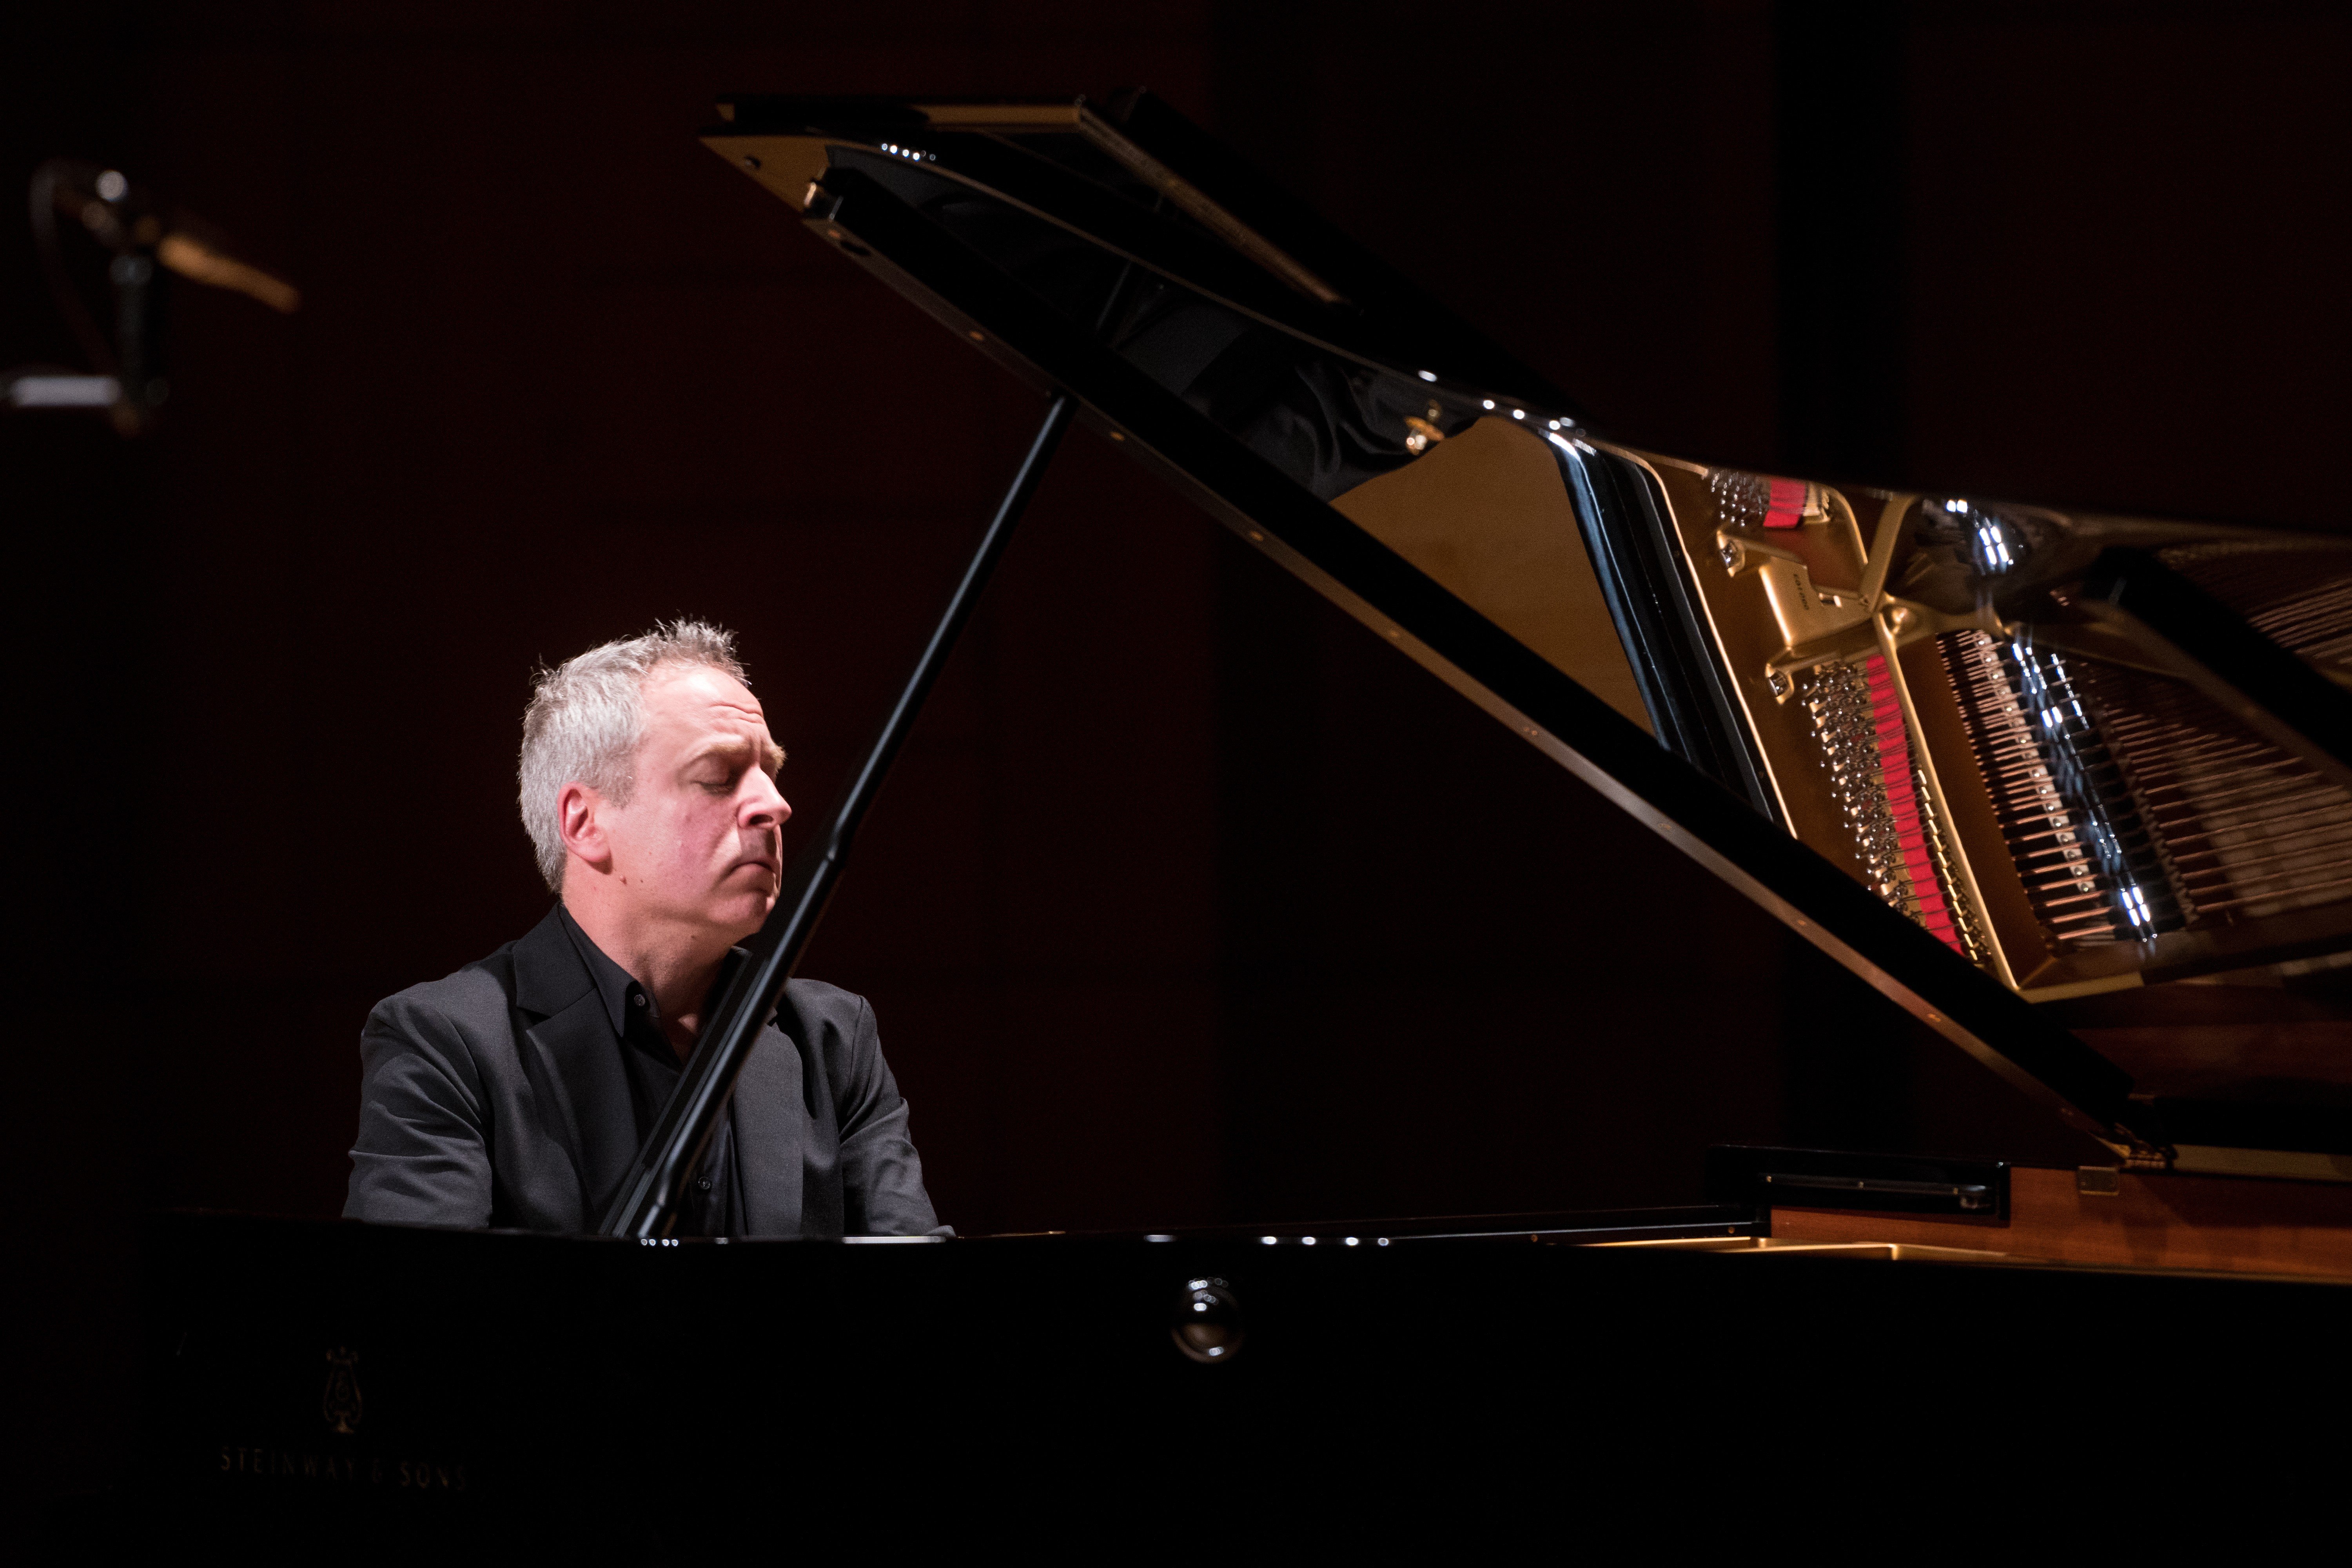 Echo of Glenn Gould in soloist’s interpretations of late works by Mozart, Beethoven, Schubert and Prokofiev